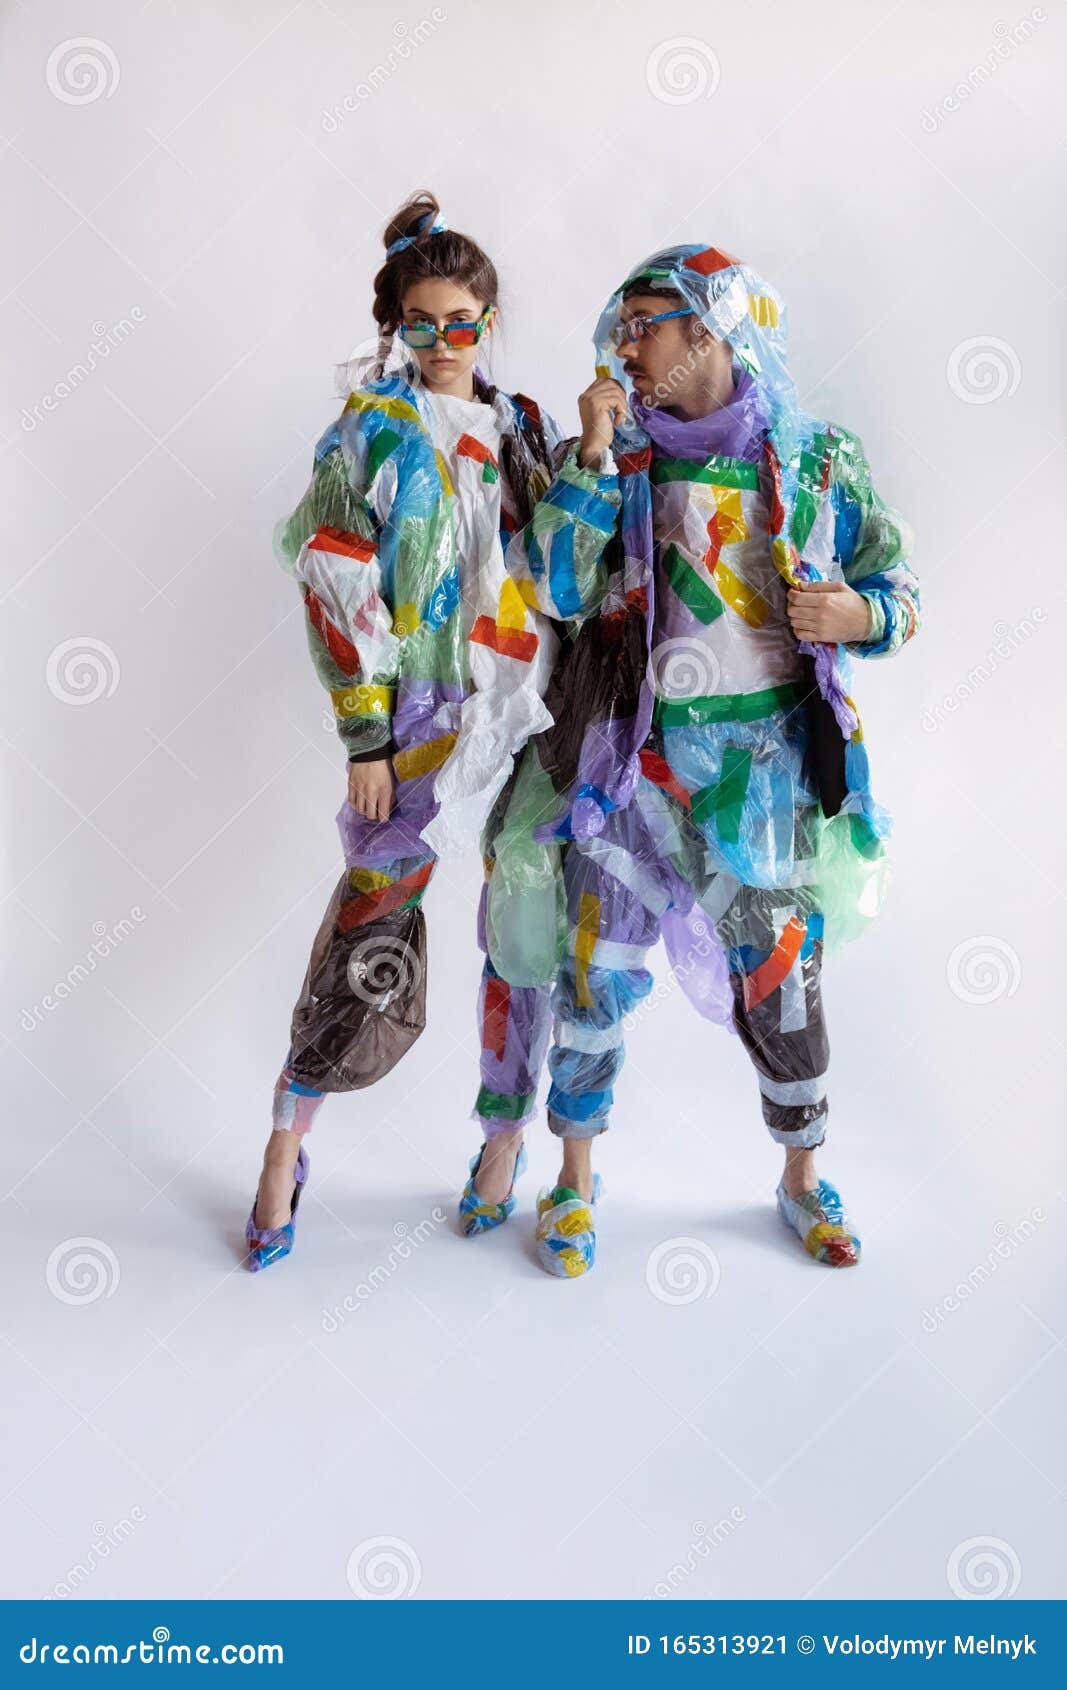 https://thumbs.dreamstime.com/z/woman-man-addicted-sales-clothes-wearing-plastic-recycling-concept-woman-man-wearing-plastic-white-background-165313921.jpg